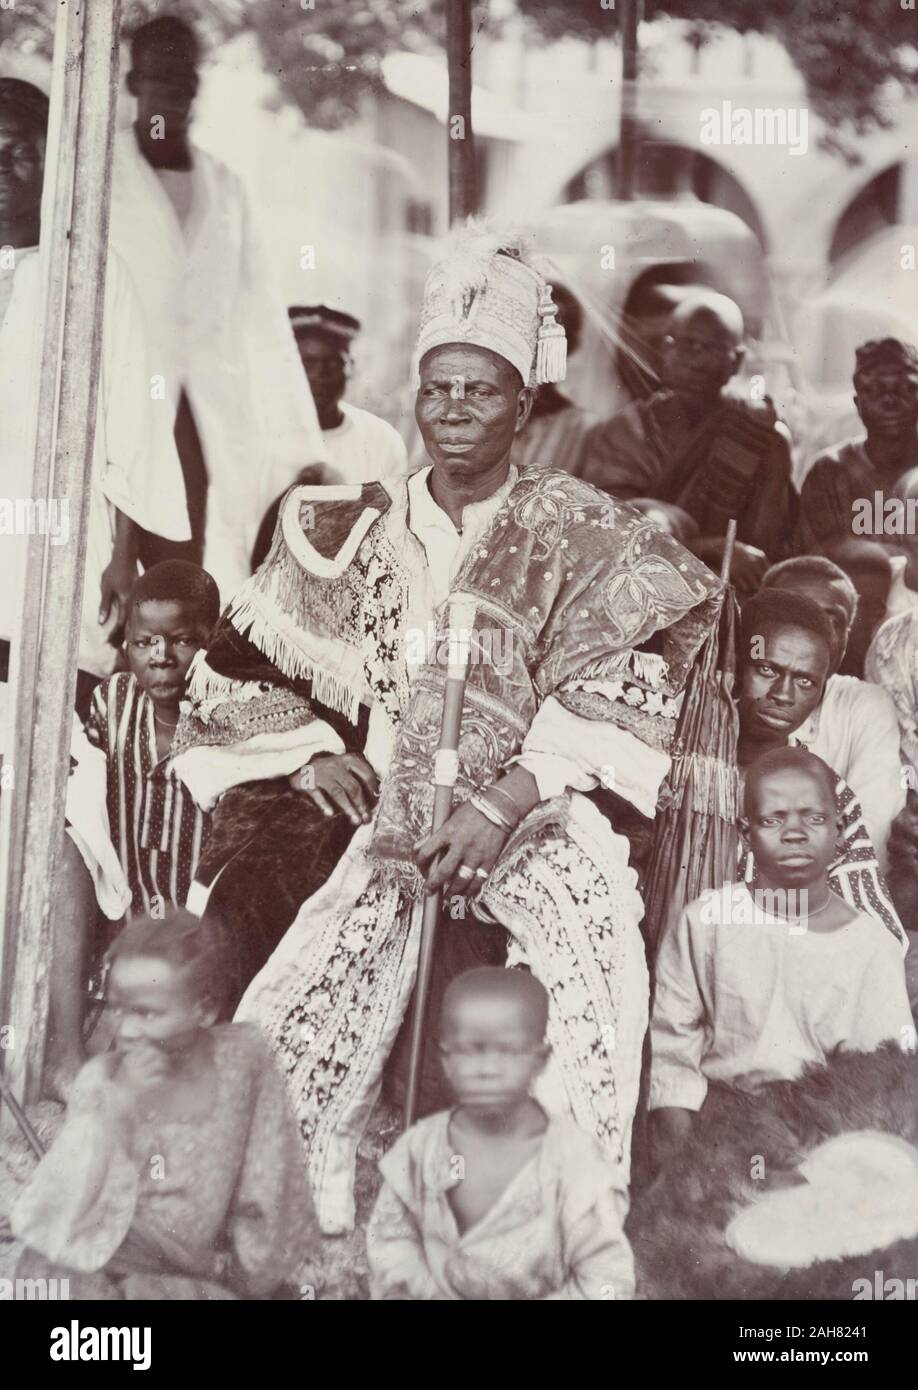 Nigeria, Marking on reverse: 'Badagry 1927'An unidentified chief, perhaps the Akran of Badagry, is seated wearing elaborate embroidered robes with a high-sided and tasselled cap. He holds a staff of office and is surrounded by children sitting on the ground, one of whom holds a fan edged with feathers, 1927. 2000/098/2/97. Stock Photo